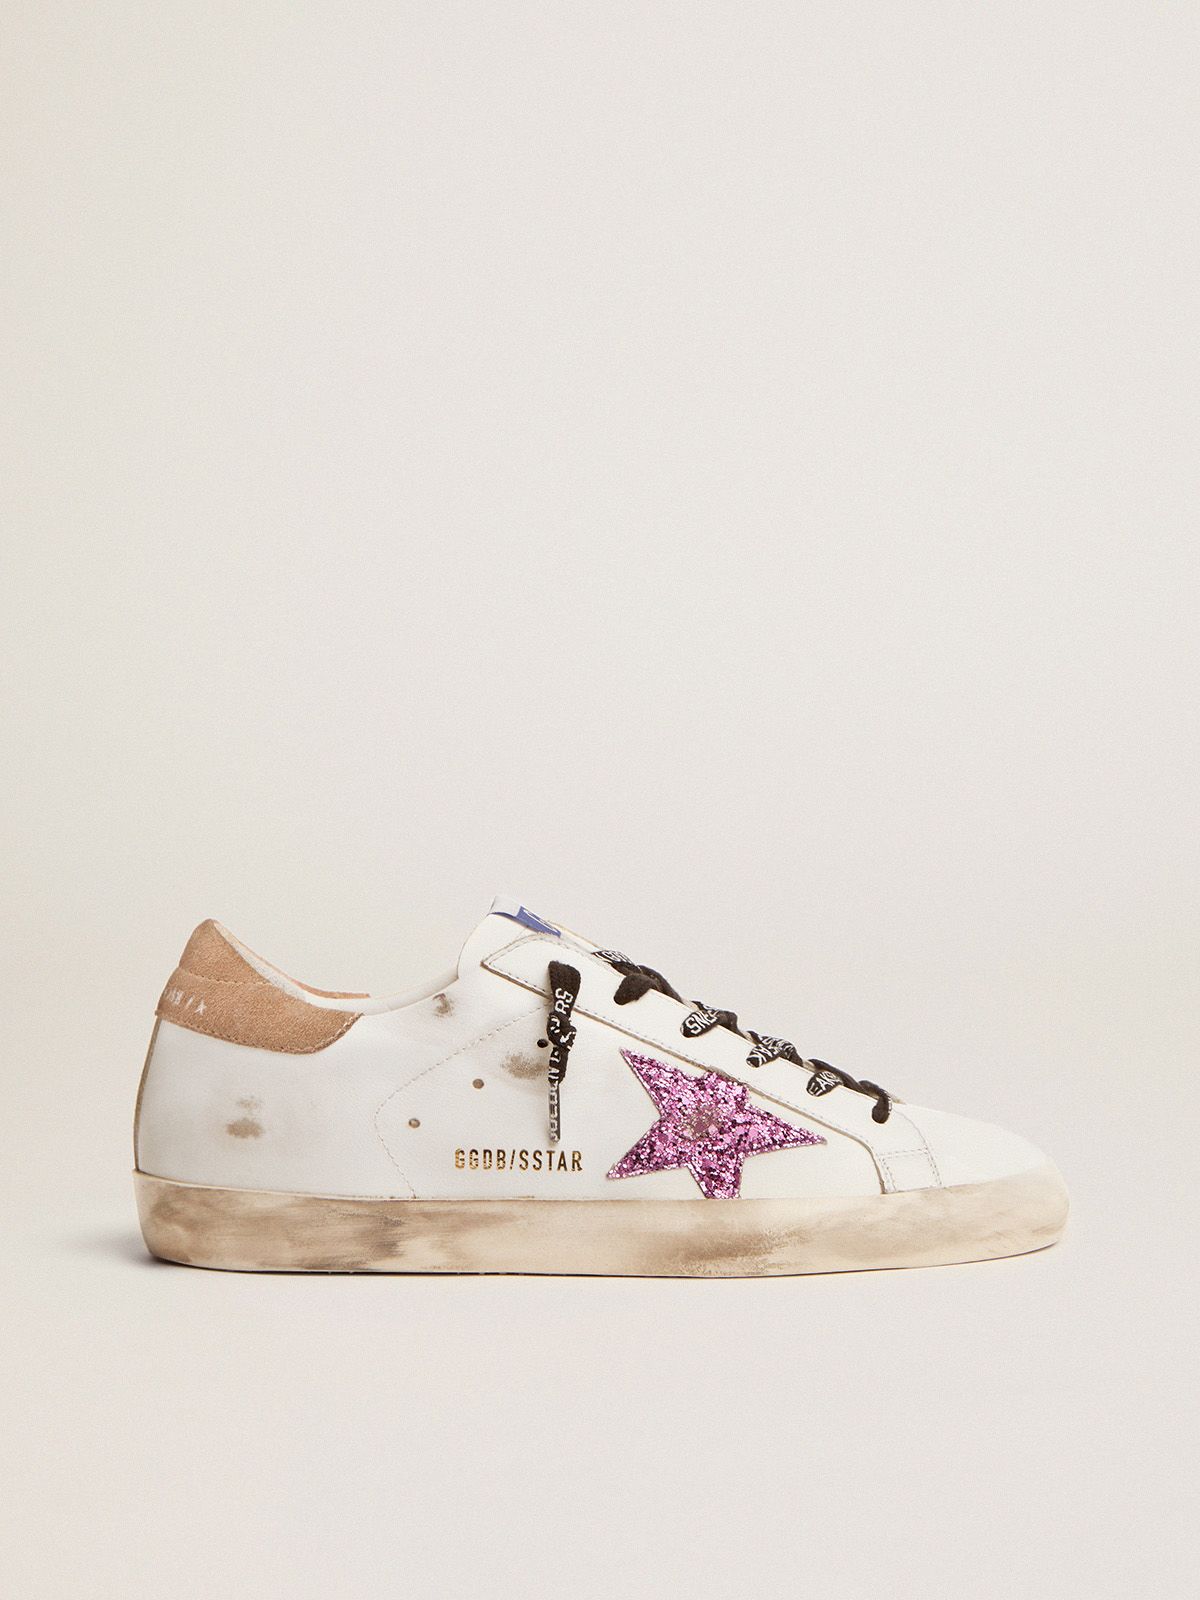 Super-Star sneakers in white leather with lavender-colored glitter star | 